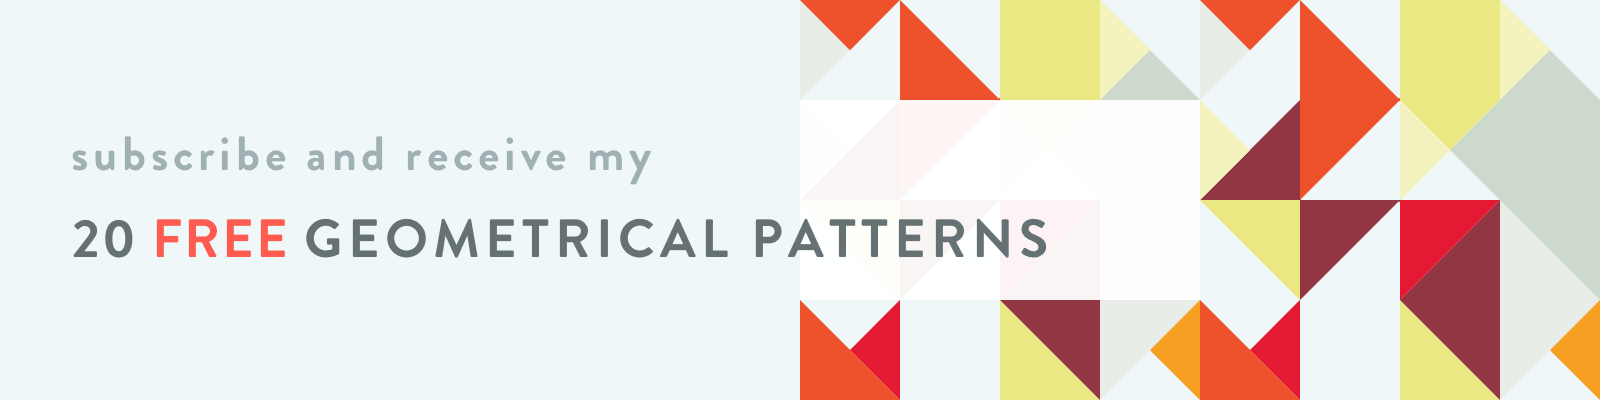 subscribe and receive my 20 FREE geometrical patterns